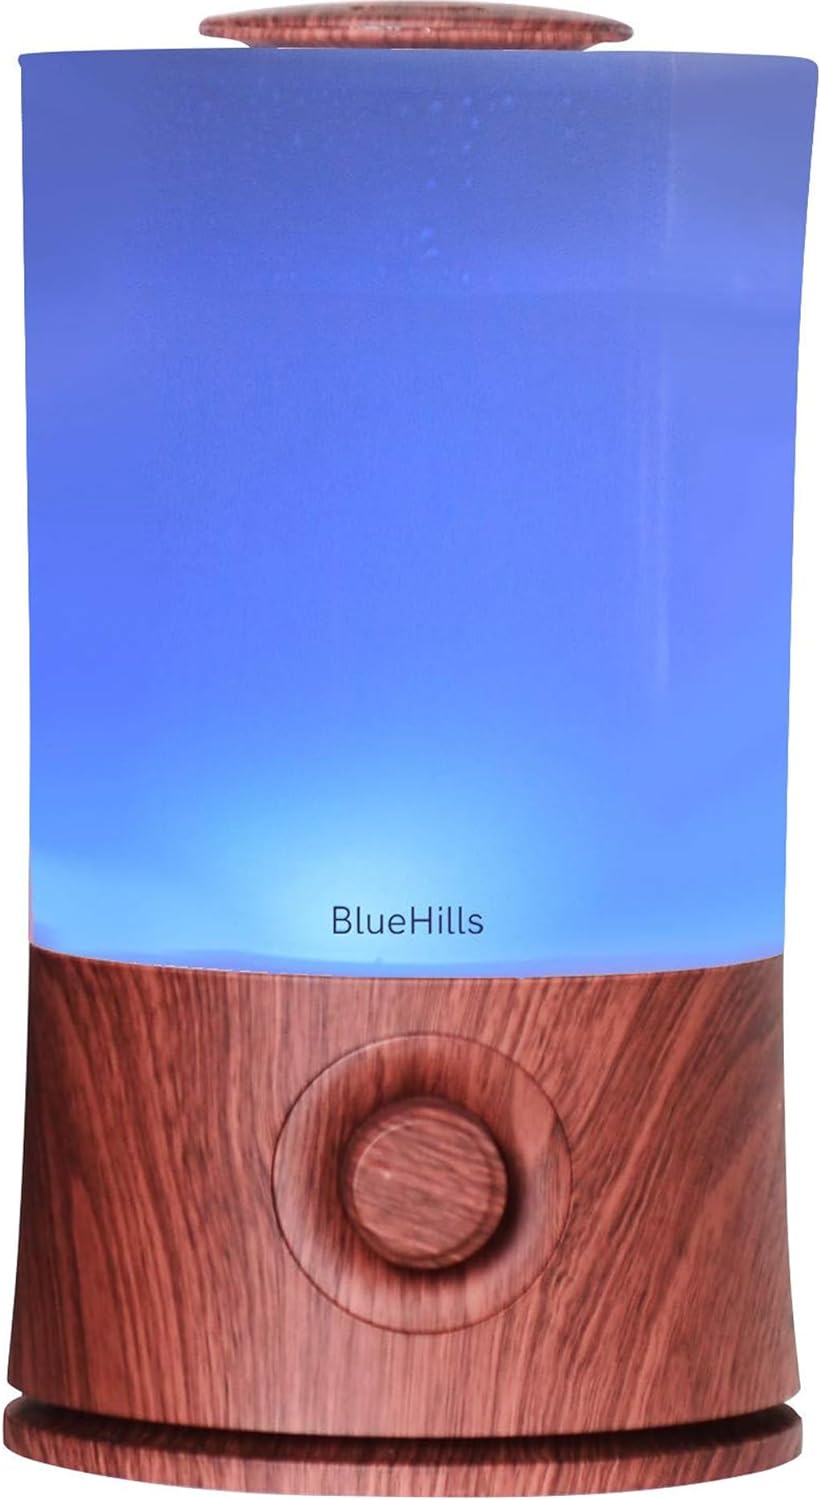 The BlueHills Humidifier with Essential Oil Diffuser is a standout product. It can run for 2-3 days, depending on the setting, making it incredibly efficient. Aesthetically pleasing, it doubles as a decor piece with a range of colorful lights to choose from. Months of use, and it still performs like it' brand new.Beyond just freshening up a room, it effectively countered cigarette smoke odor when I tried it. The scent longevity is impressive; a single fill can last days, just ensure the right a